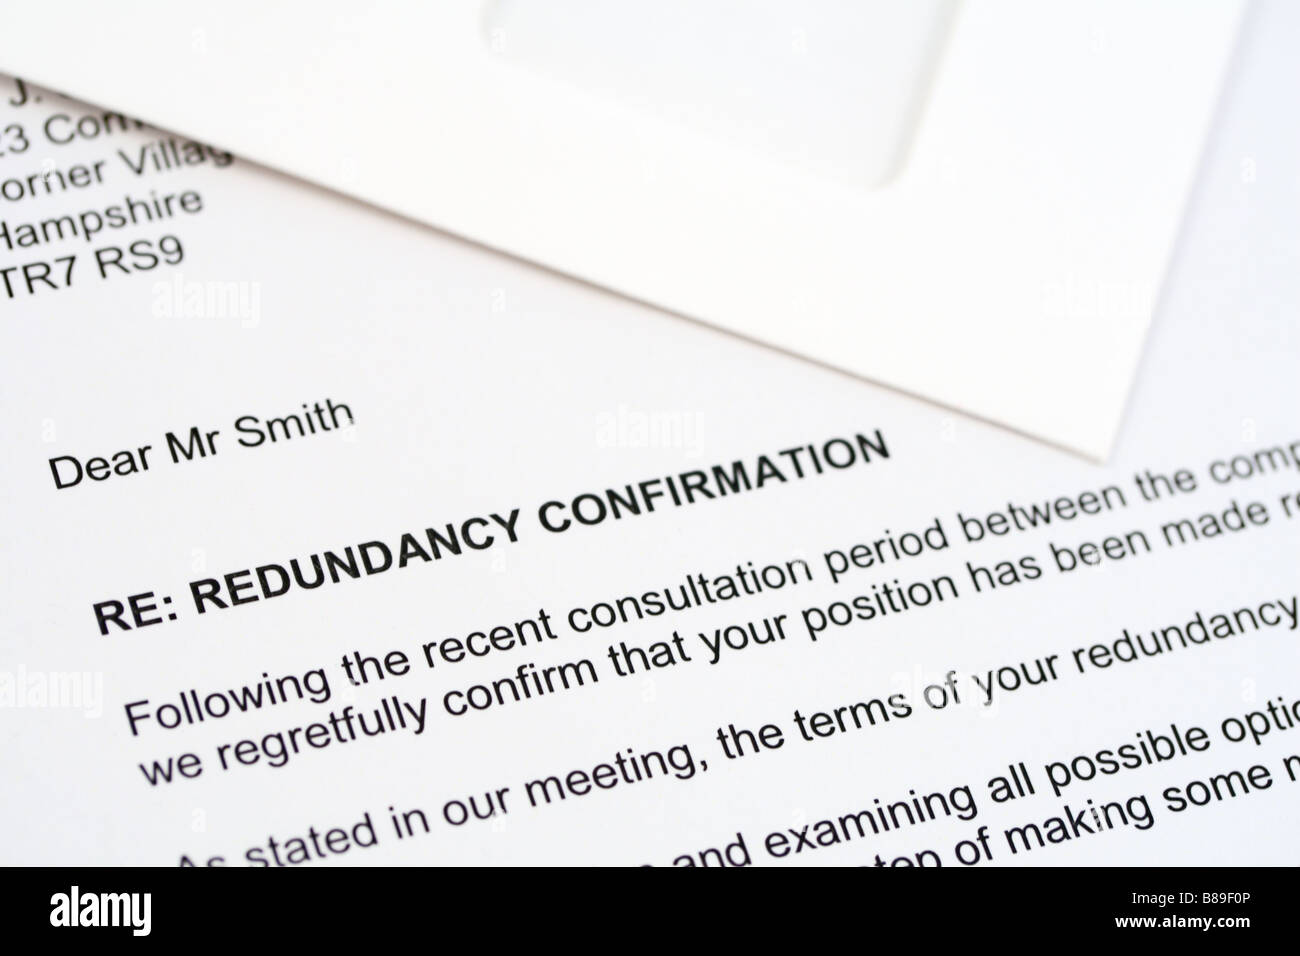 A redundancy letter with envelope Stock Photo